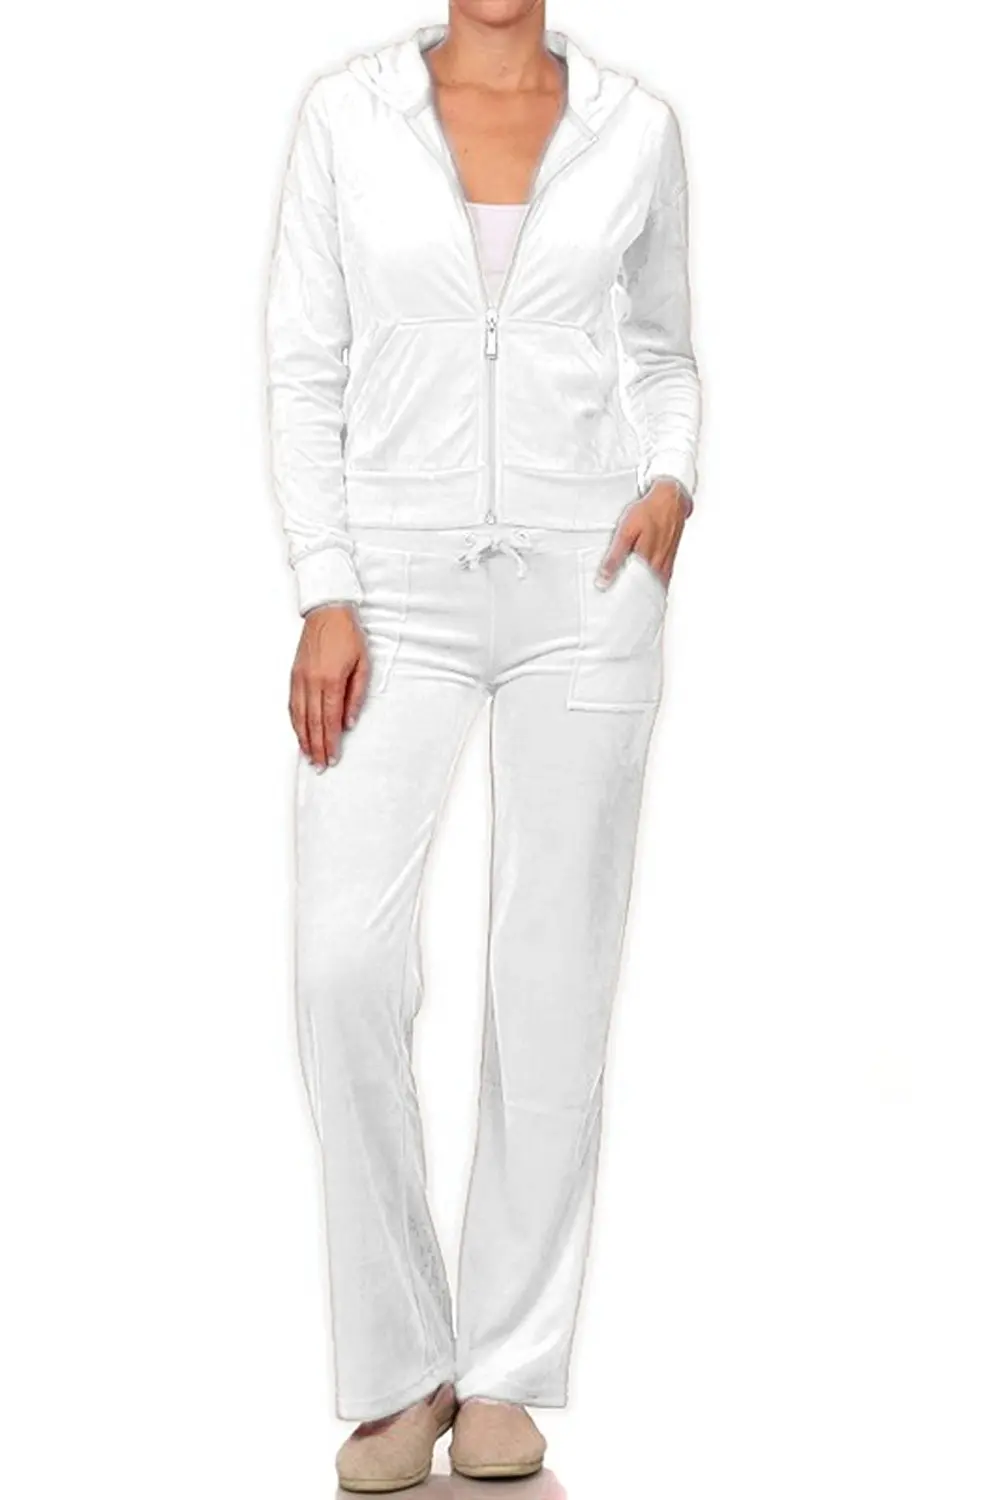 all white jogging suit womens